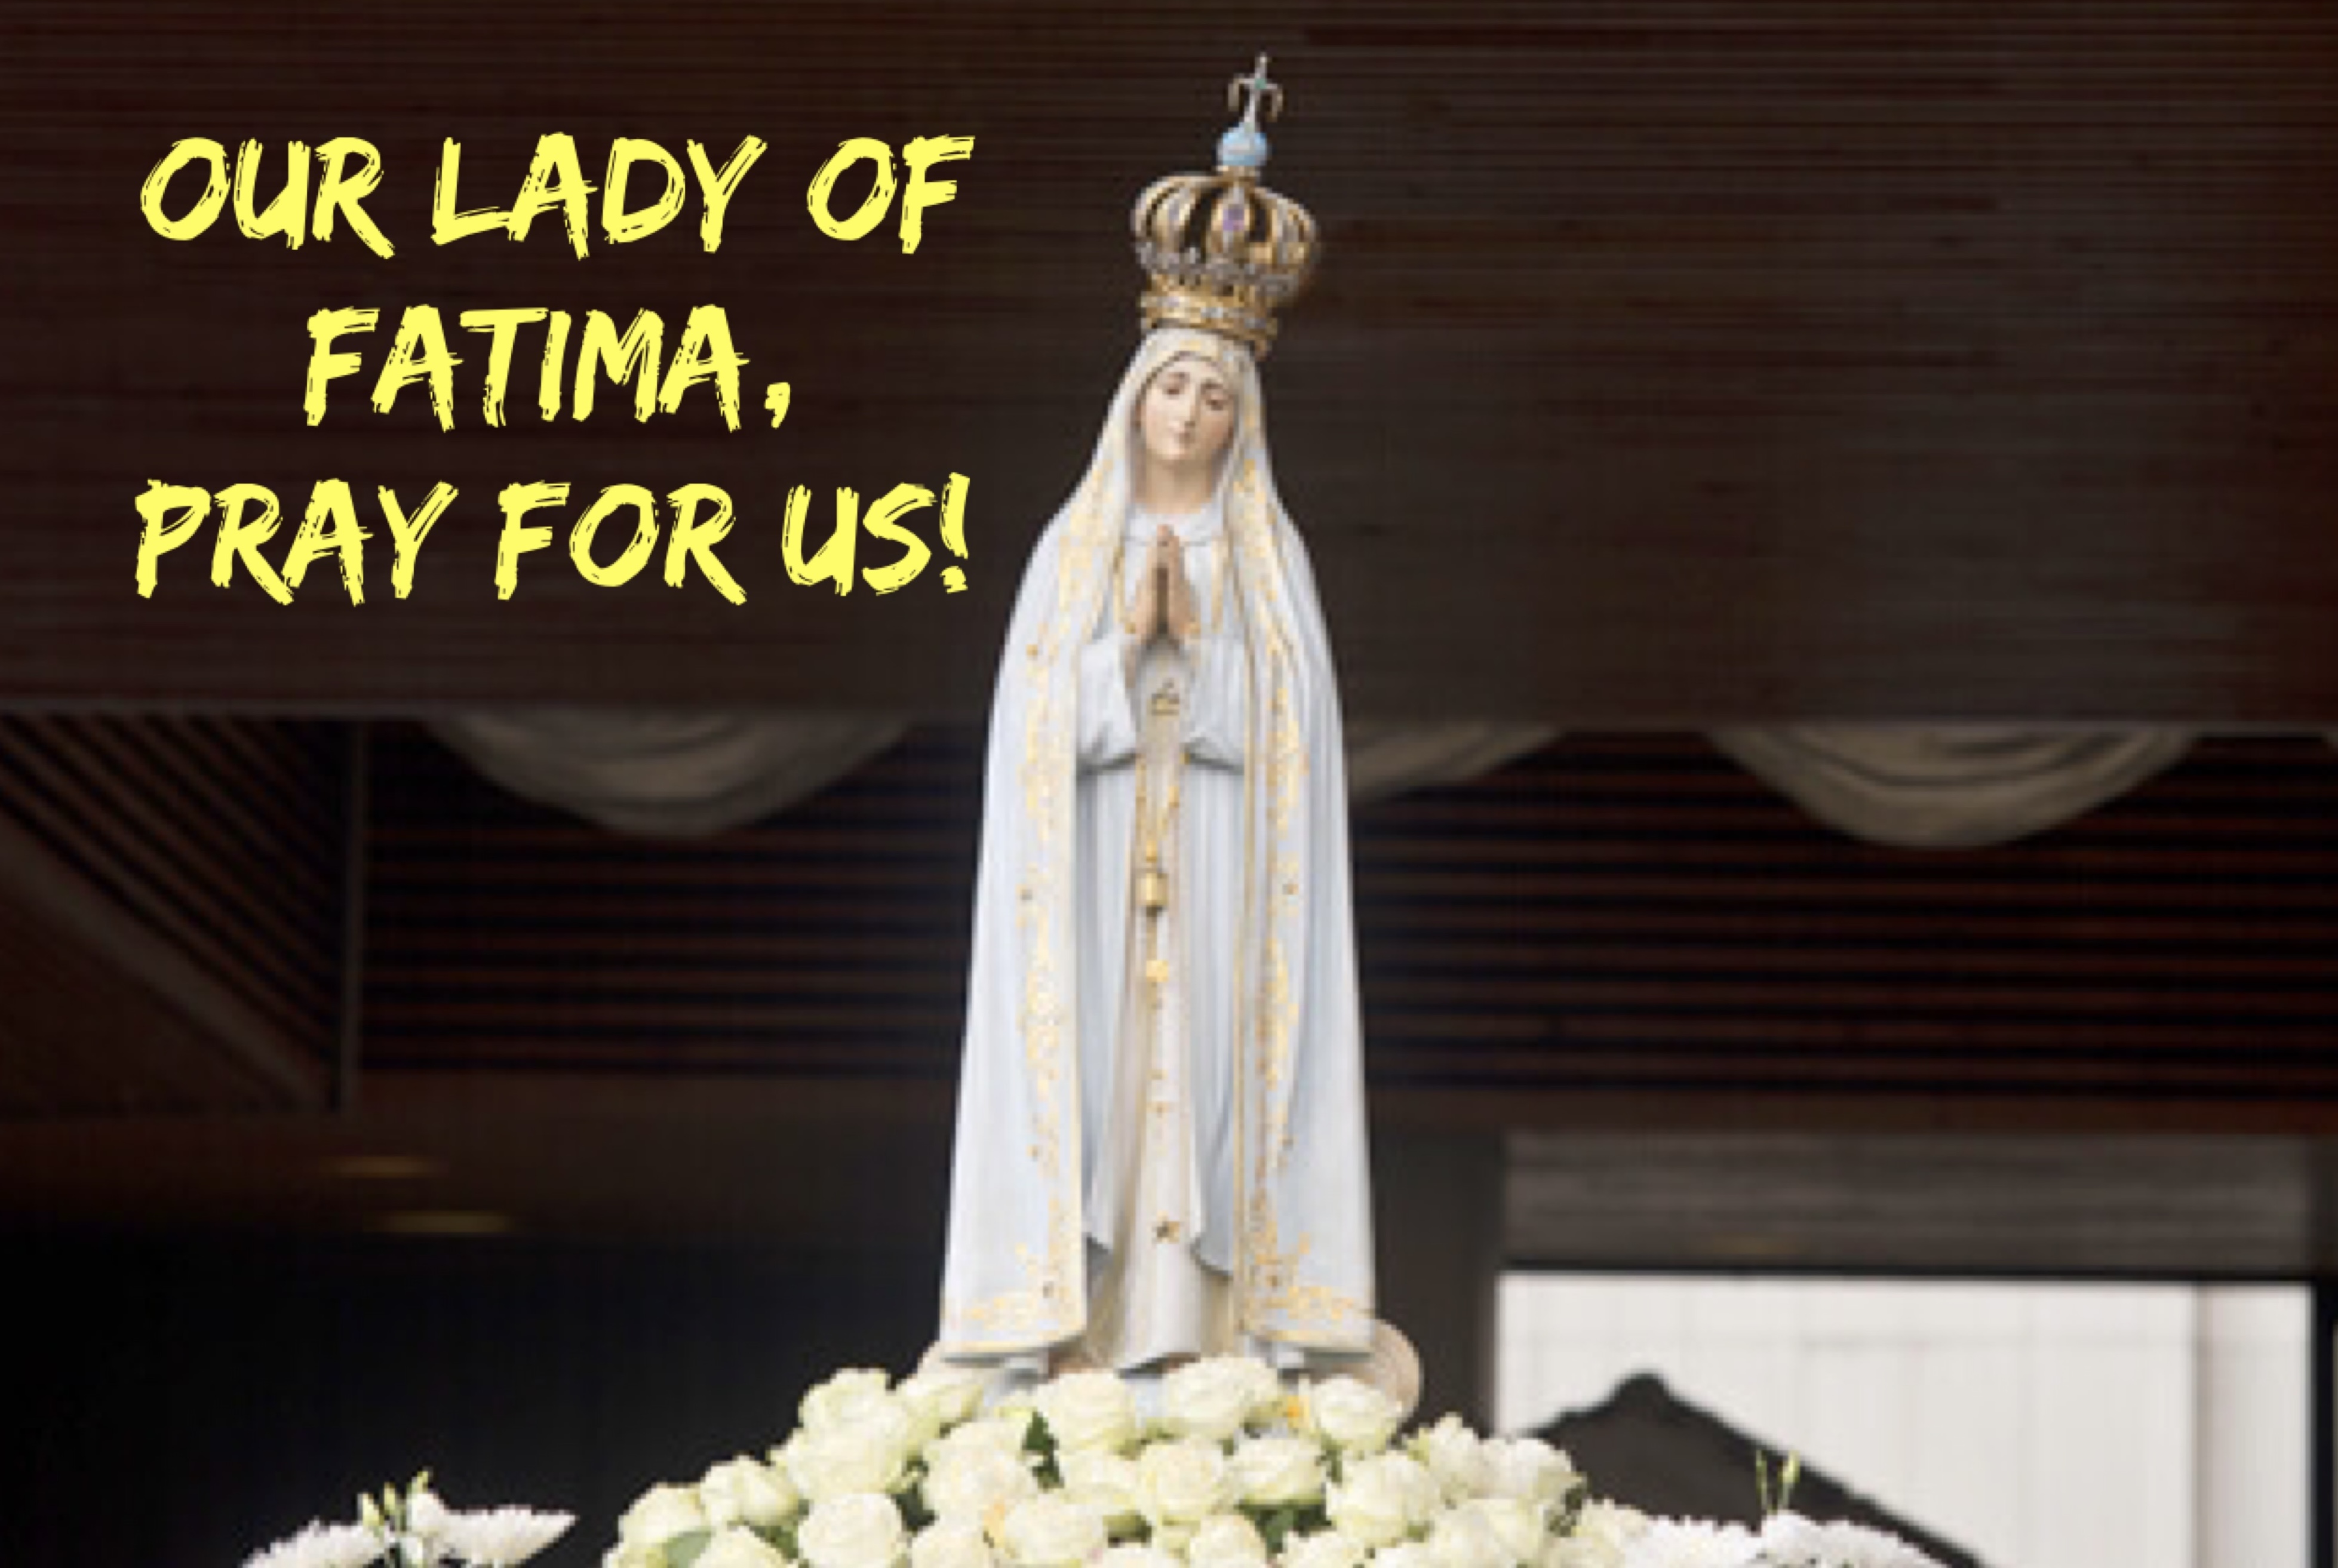 13th May - Our Lady of Fatima 